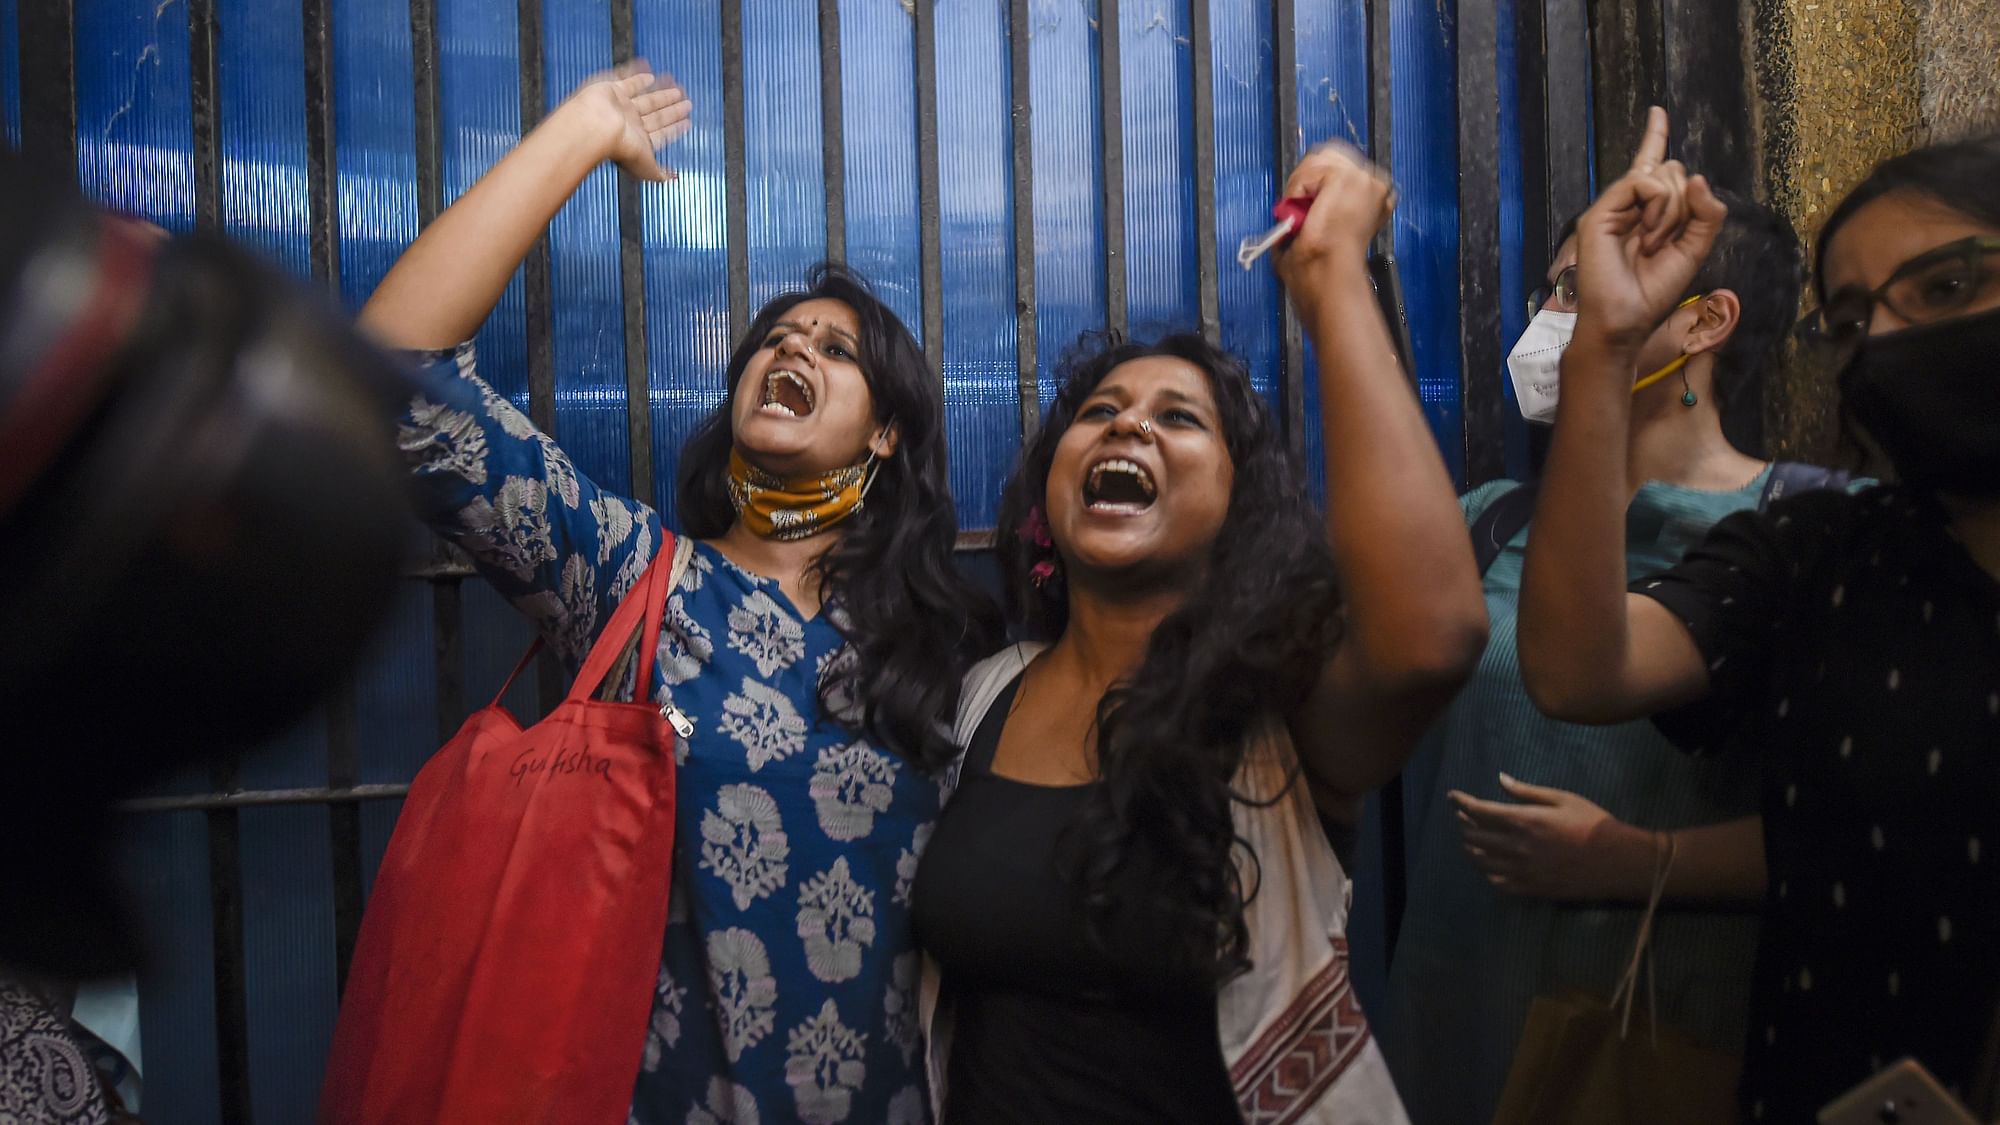 Student activists Devangana Kalita, Natasha Narwal and Asif Iqbal Tanha were released from the Tihar Jail after 13 months of imprisonment on Thursday, 17 June.